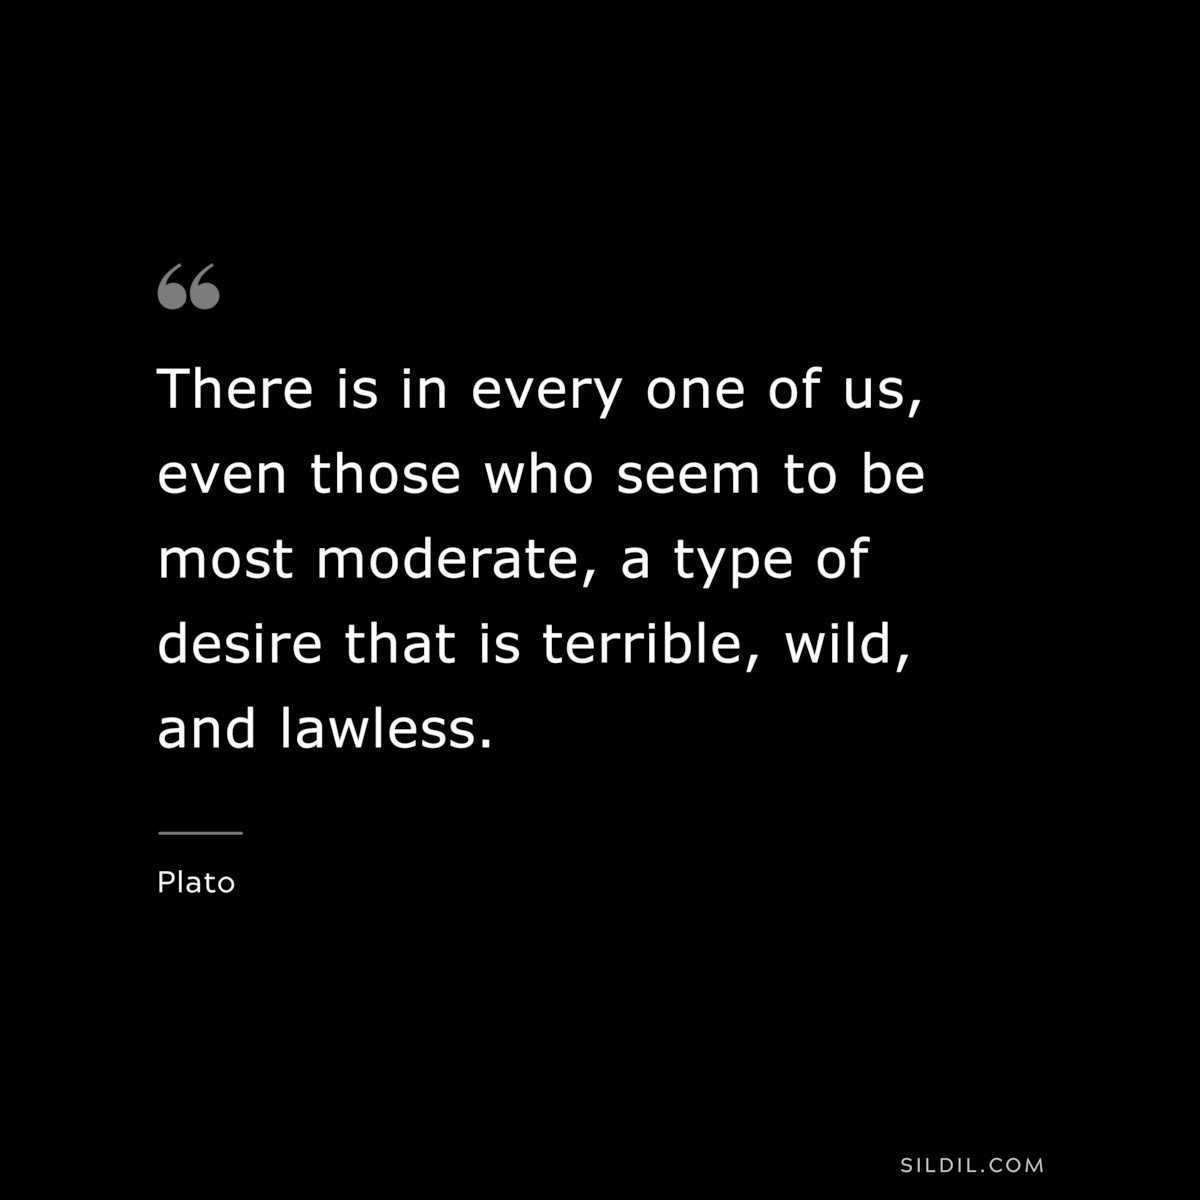 There is in every one of us, even those who seem to be most moderate, a type of desire that is terrible, wild, and lawless. ― Plato